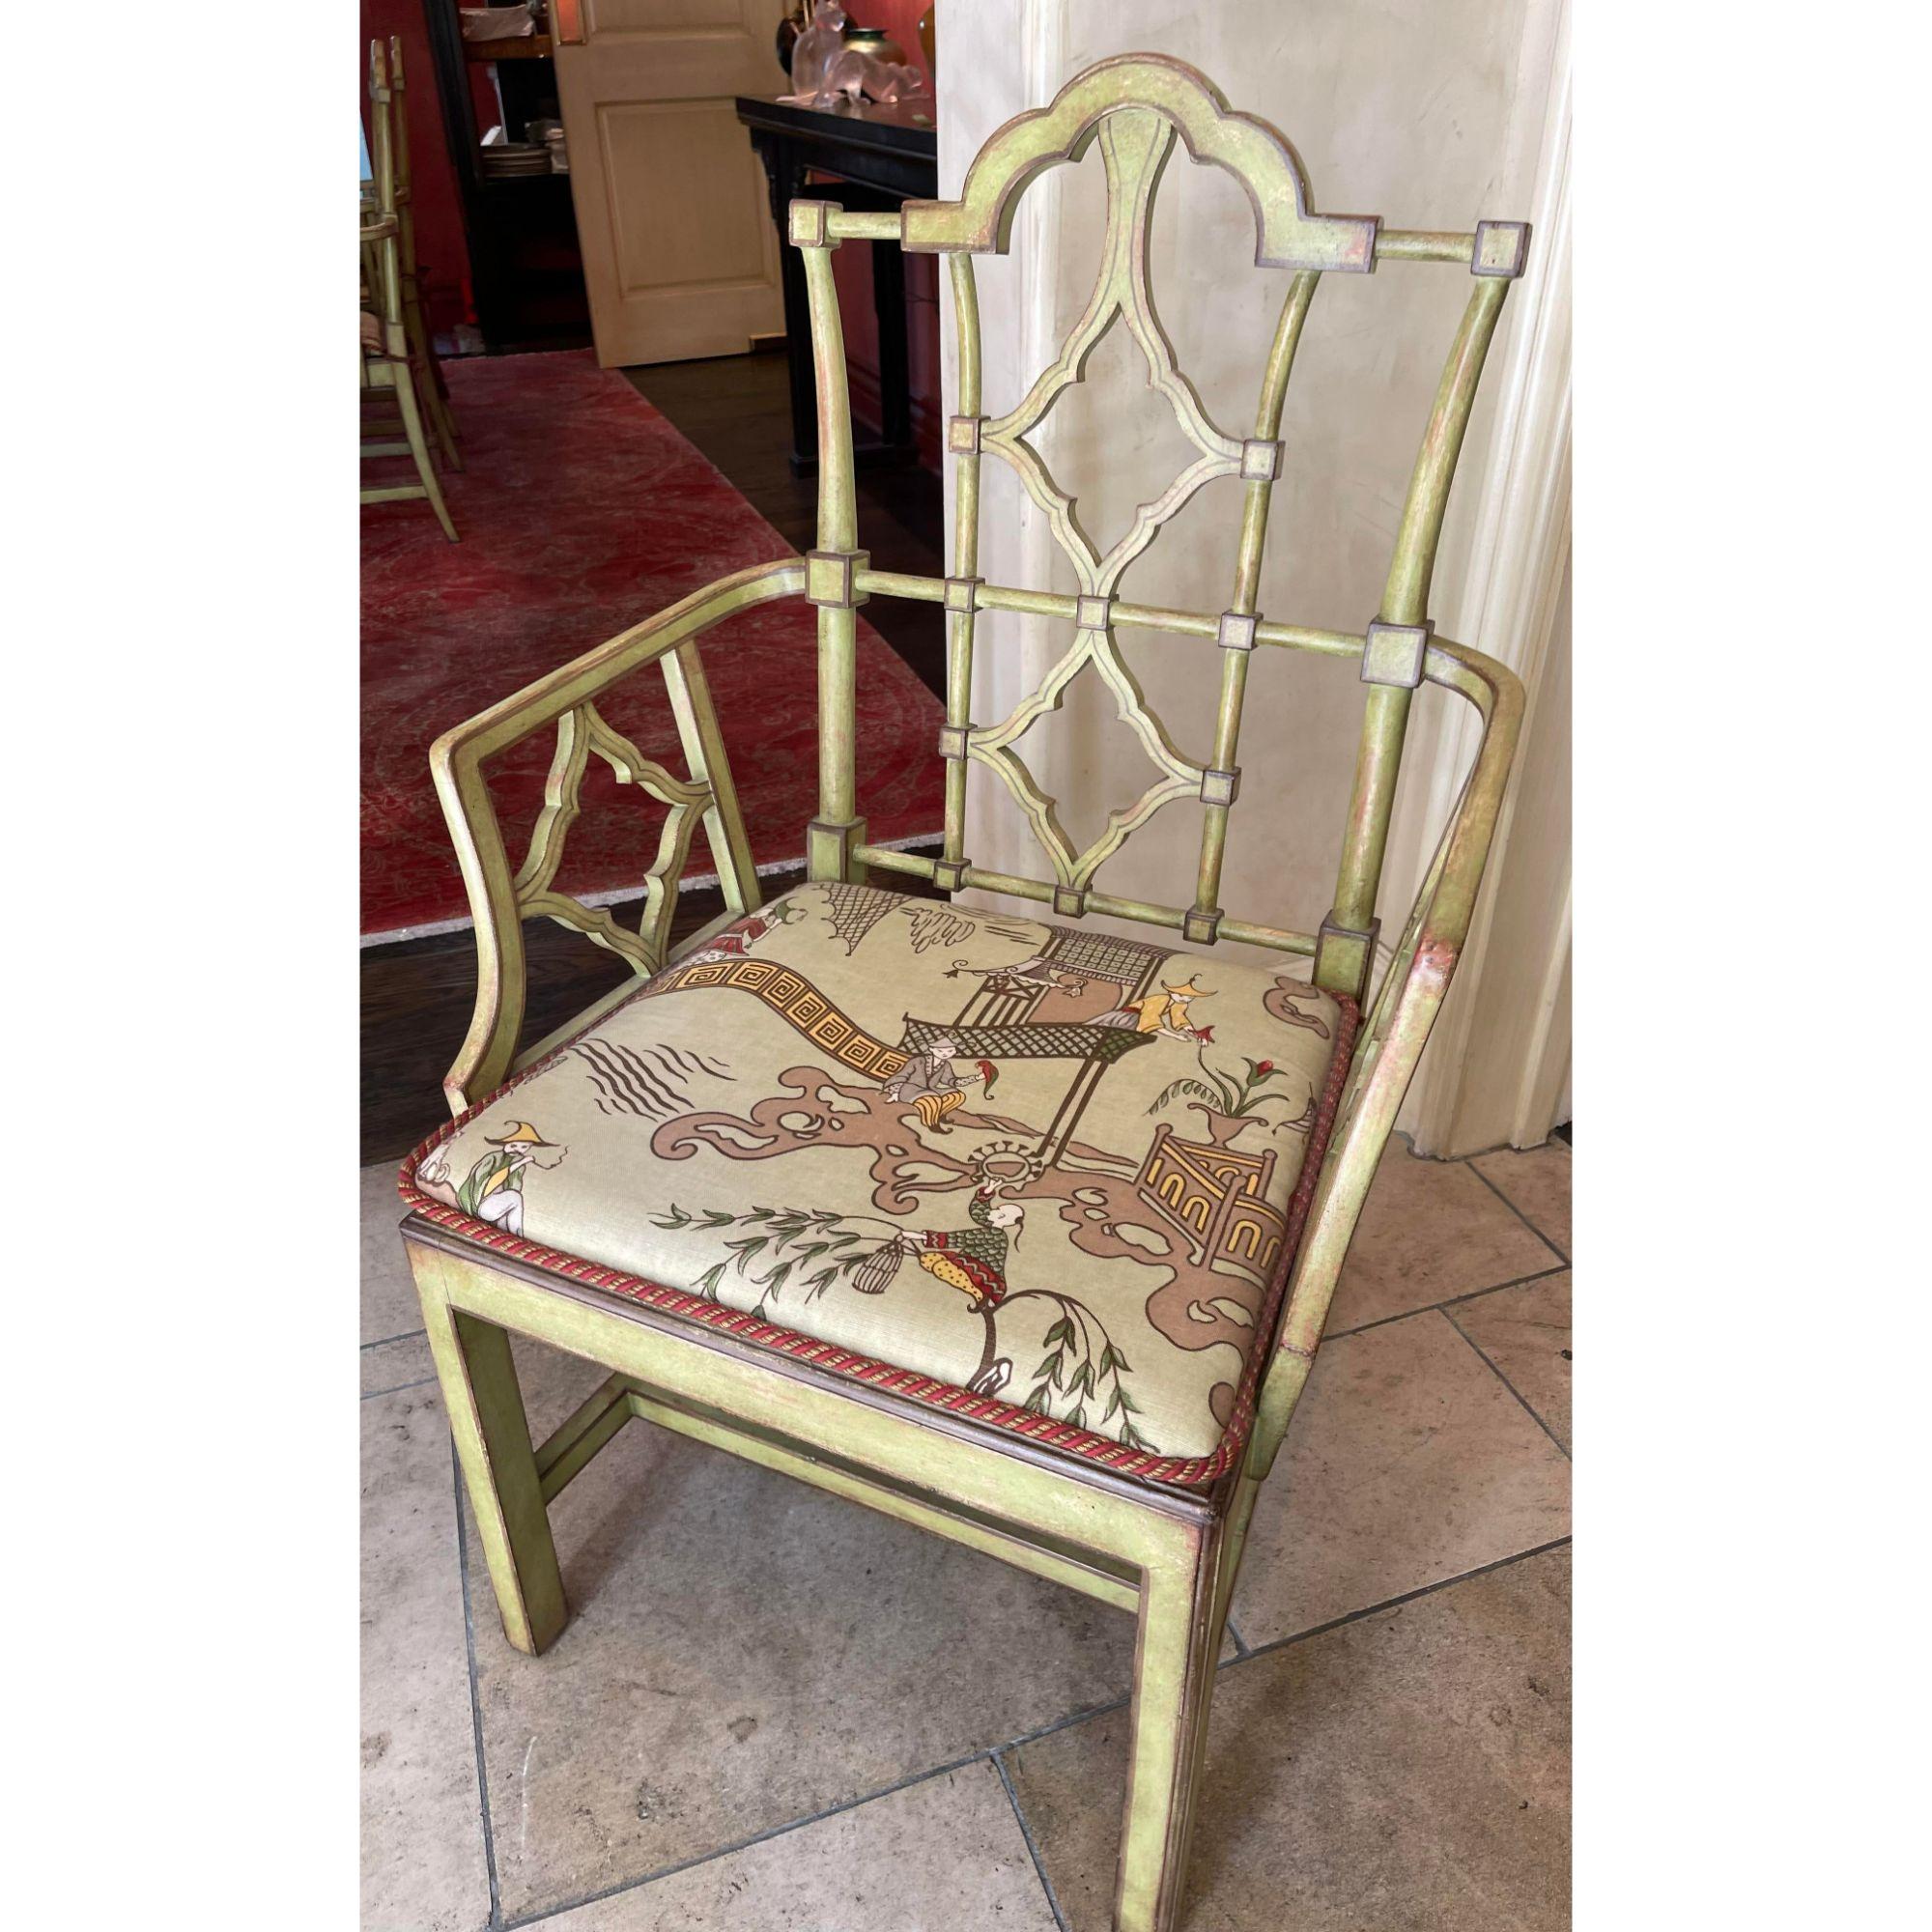 Patina furniture Company green Chinoiserie faux bamboo dining arm chair. Each with a custom chinoiserie seat cushion and cane seat. Signed Patina.

Additional information: 
Materials: caning, faux bamboo
Color: olive
Period: 1990s
Styles: